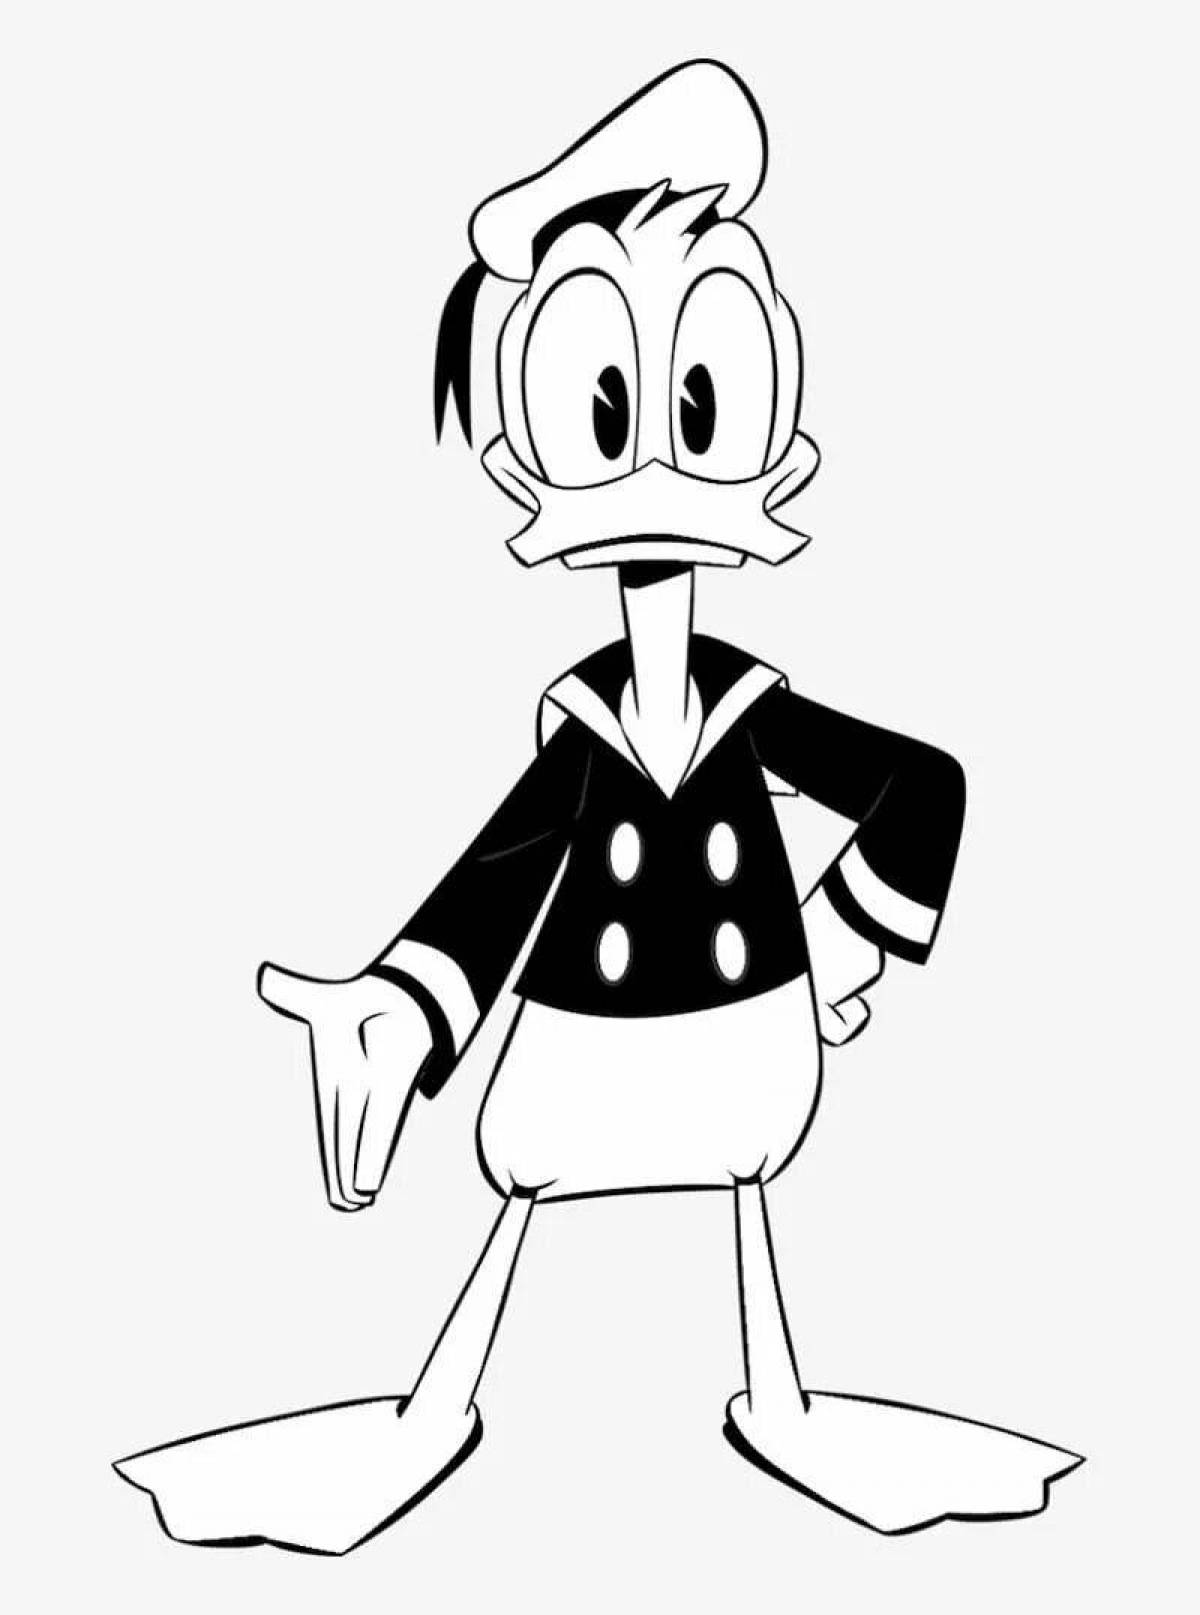 Radiant twist mcduck coloring page